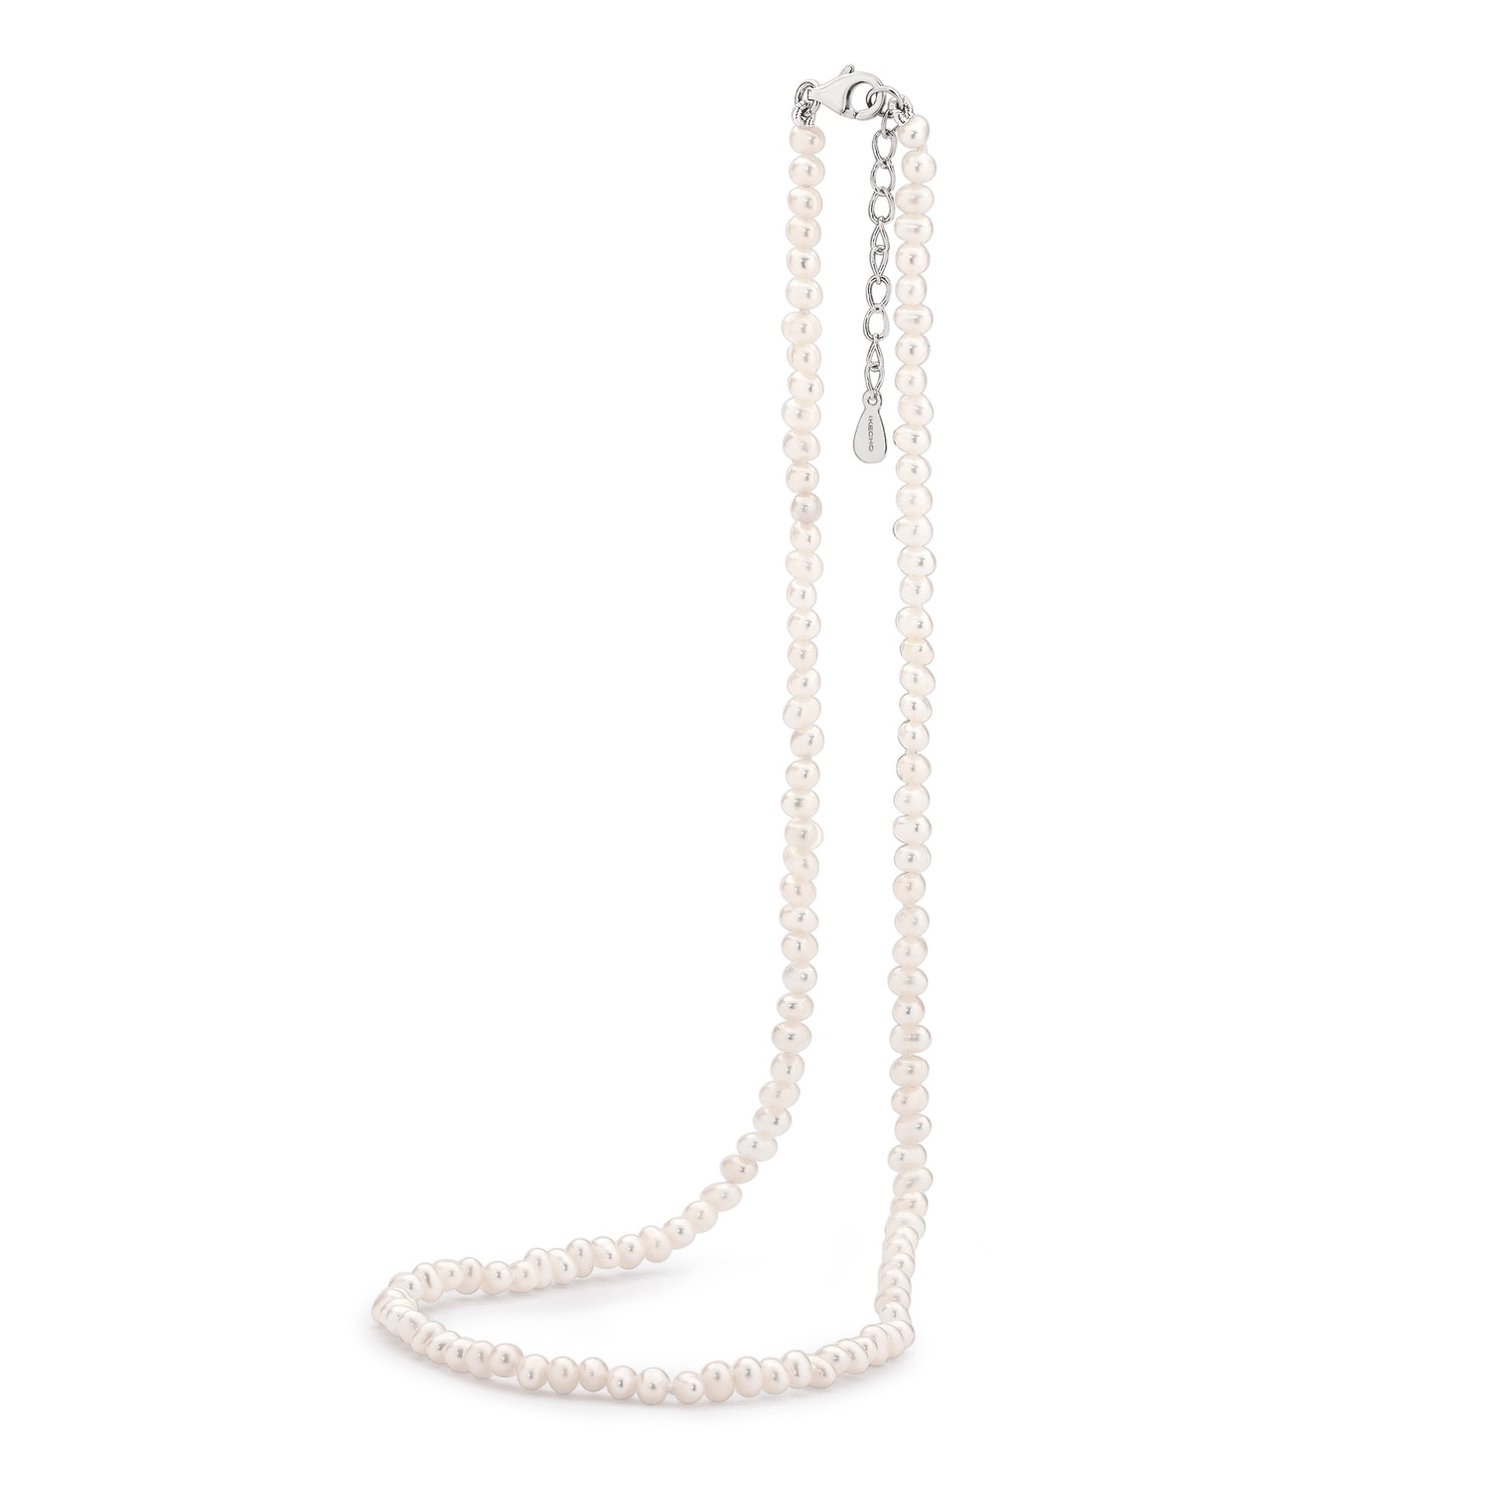 Oval Keshi White Fresh Water Pearl Necklace 40cm_0